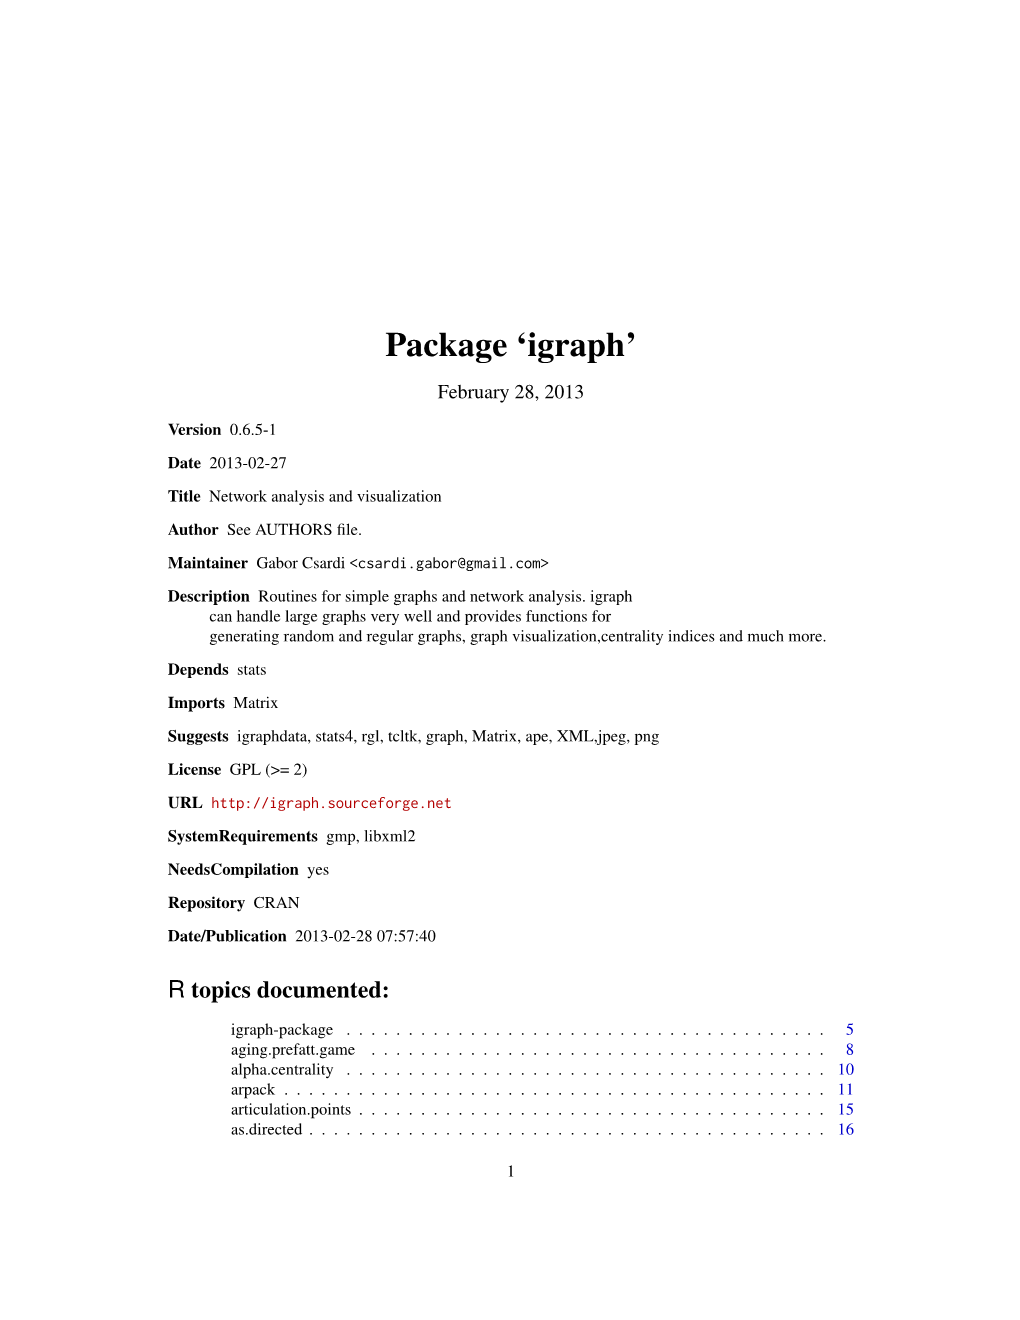 Package 'Igraph'